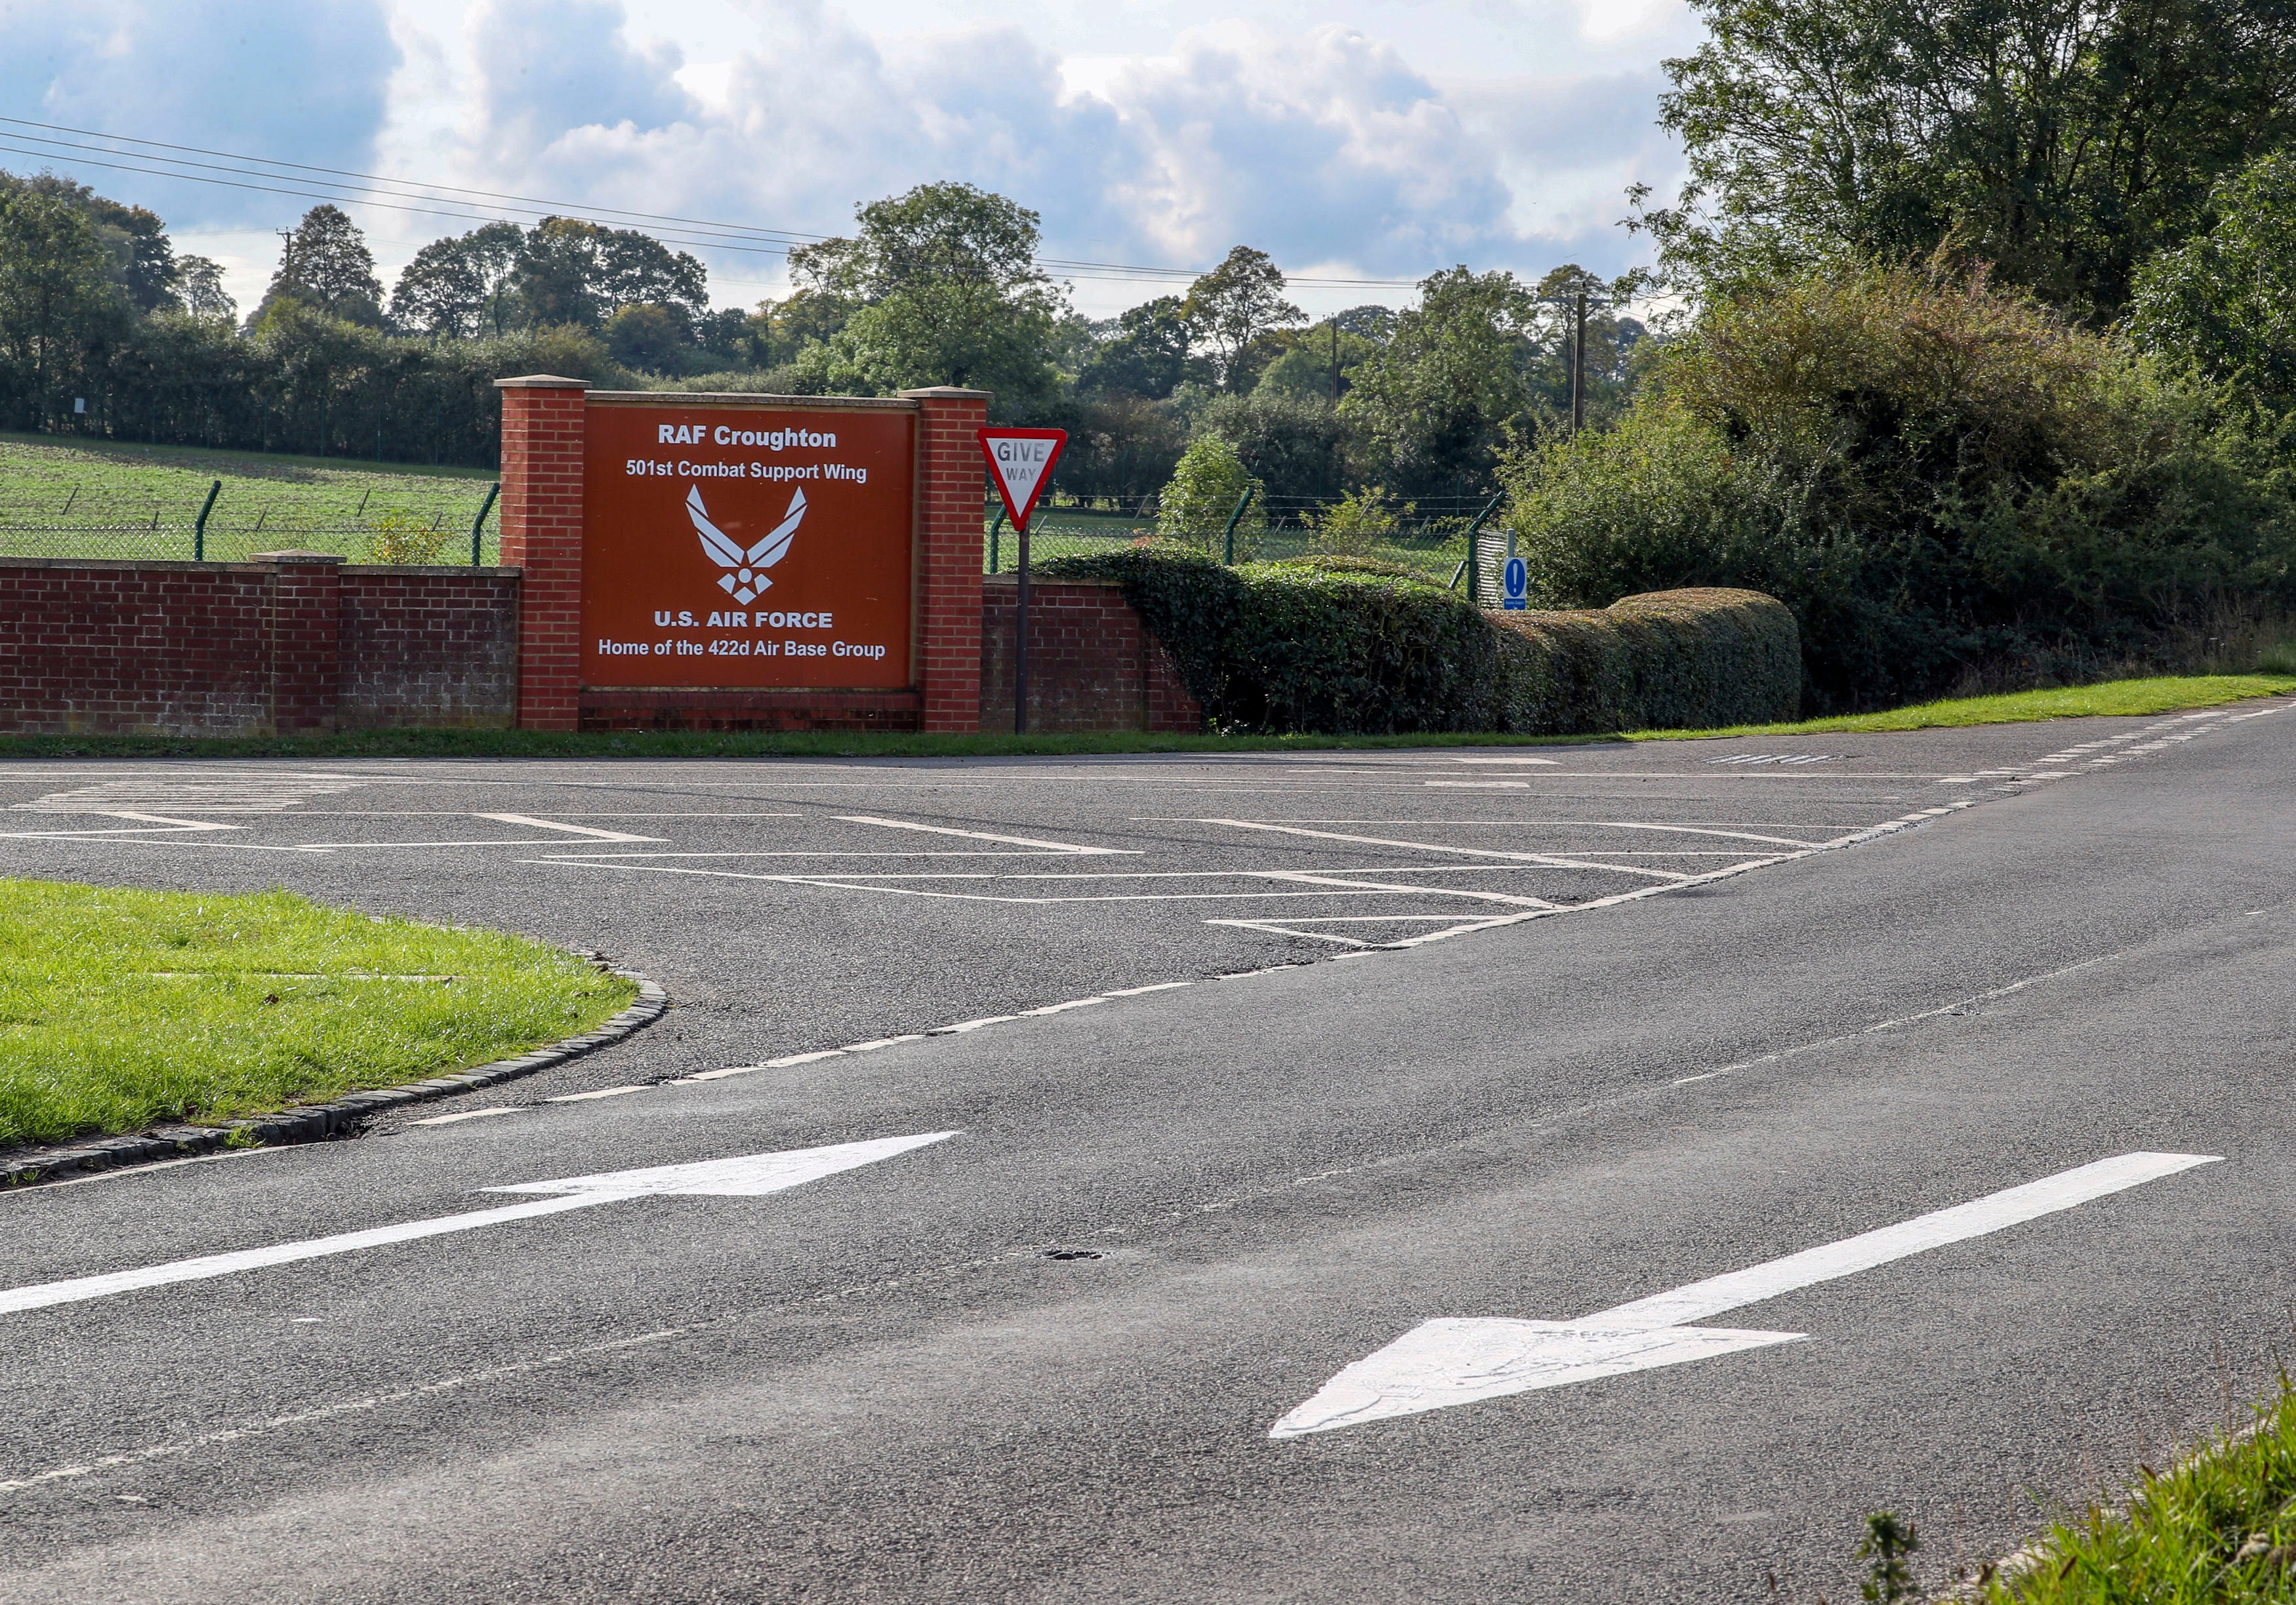 Drive on Left arrows on the road outside RAF Croughton, in Northamptonshire, near where Harry Dunn died